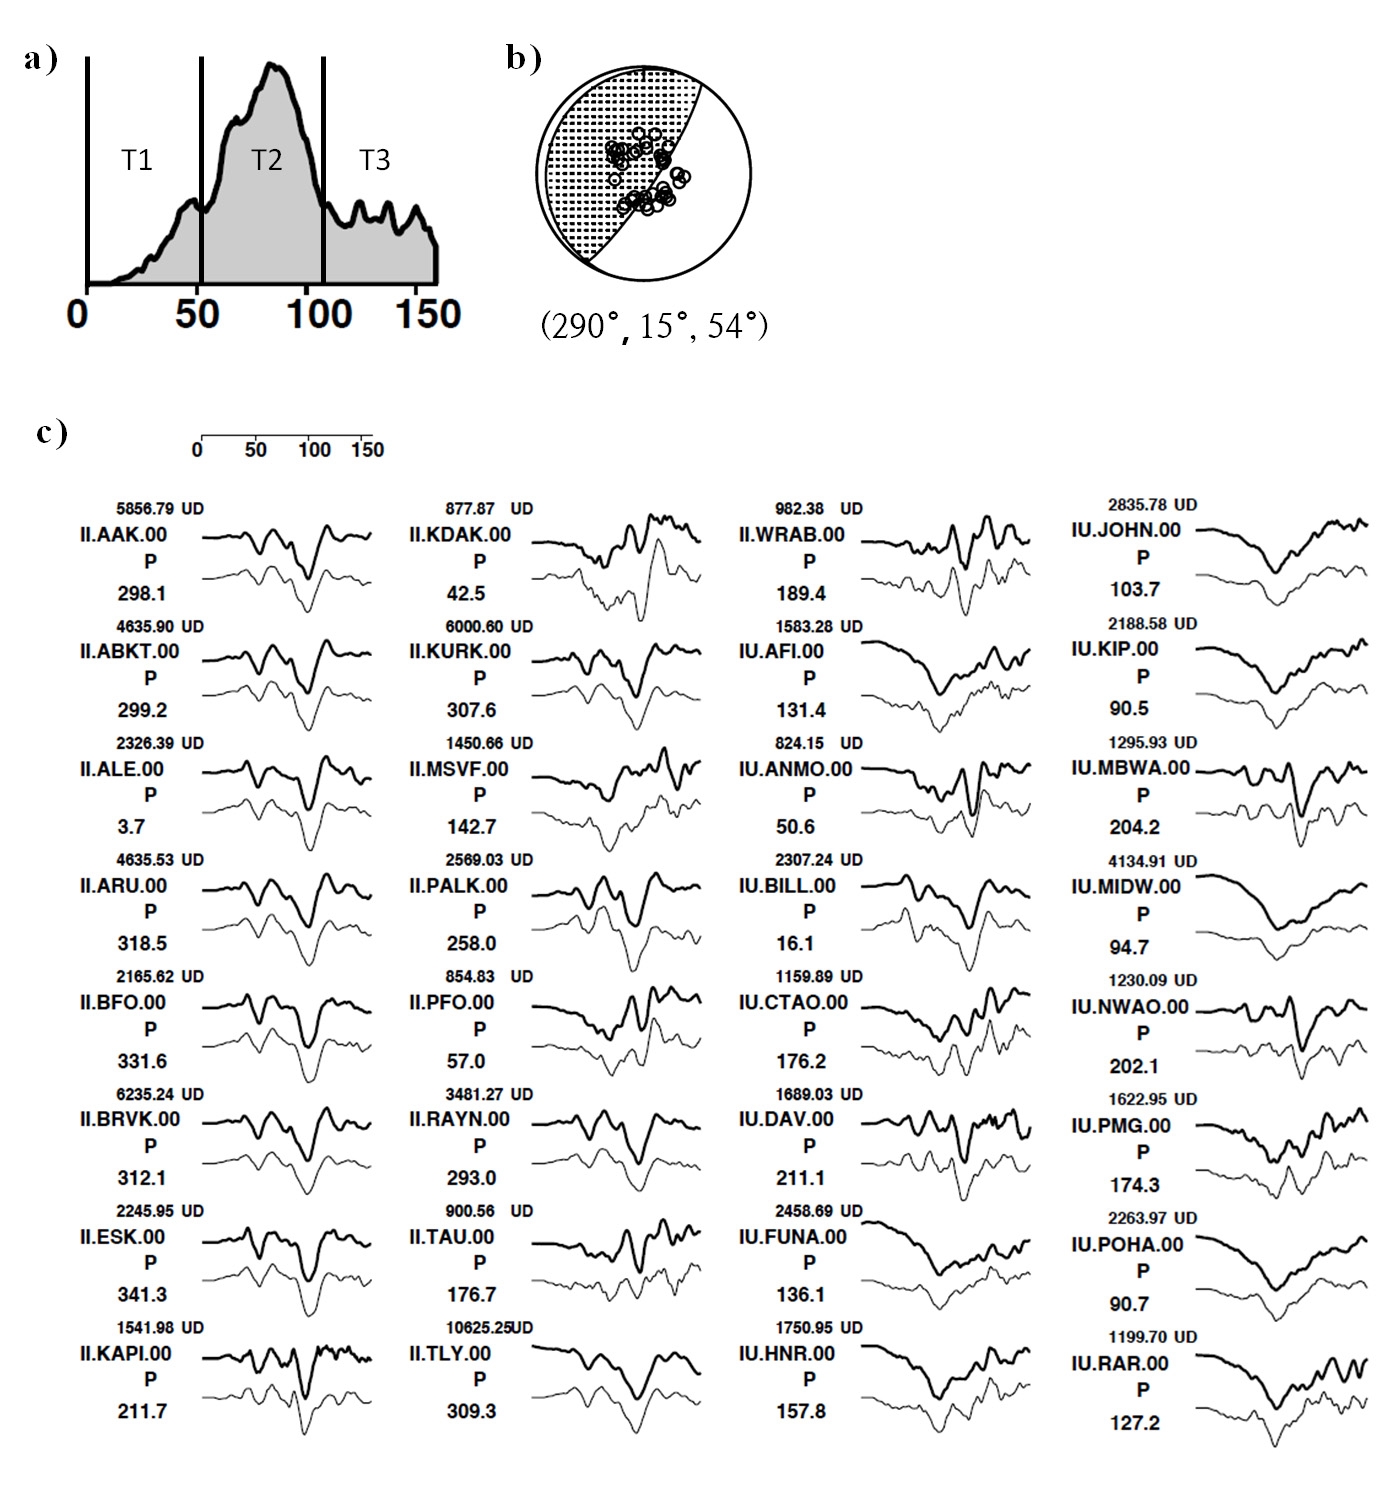 Fig. 2.4.10 Results of teleseismic body-wave inversion. a) Moment rate function. b) Focal mechanism. c) P waveform fits for the teleseismic inversion. Observed and calculated waveforms are shown as thick and thin lines.